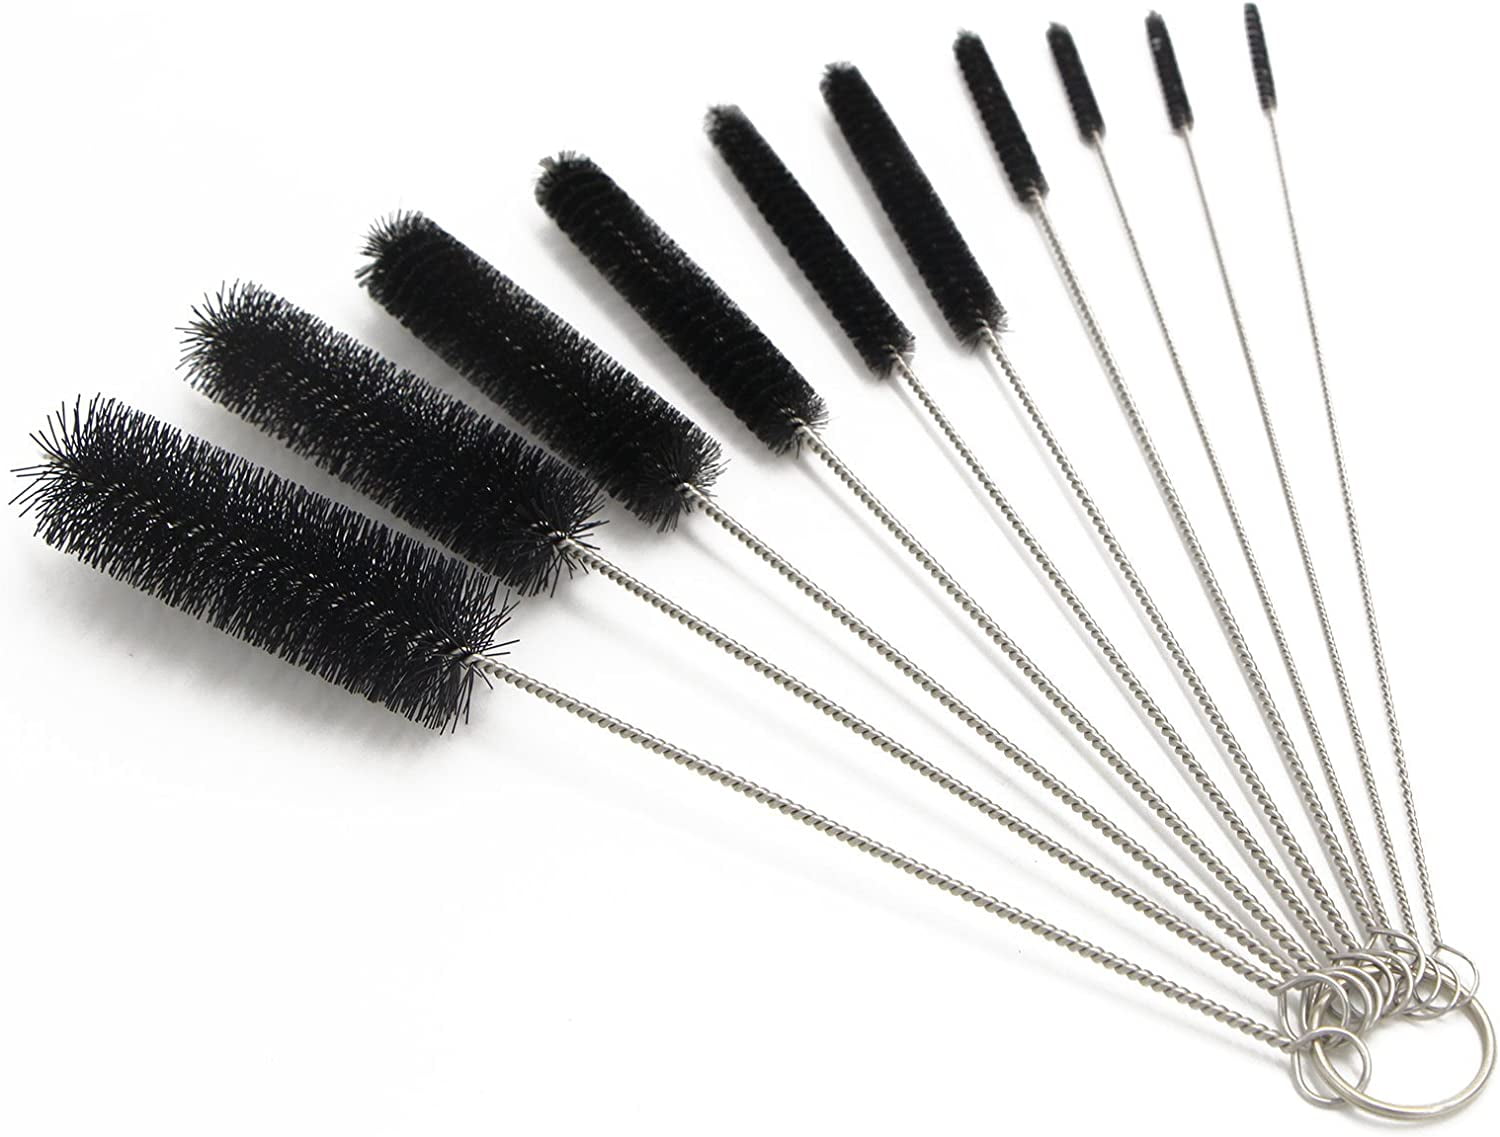 8.2 Inch Nylon Tube Brush Pipe Cleaning Brushes with Packing Box, Set of 10